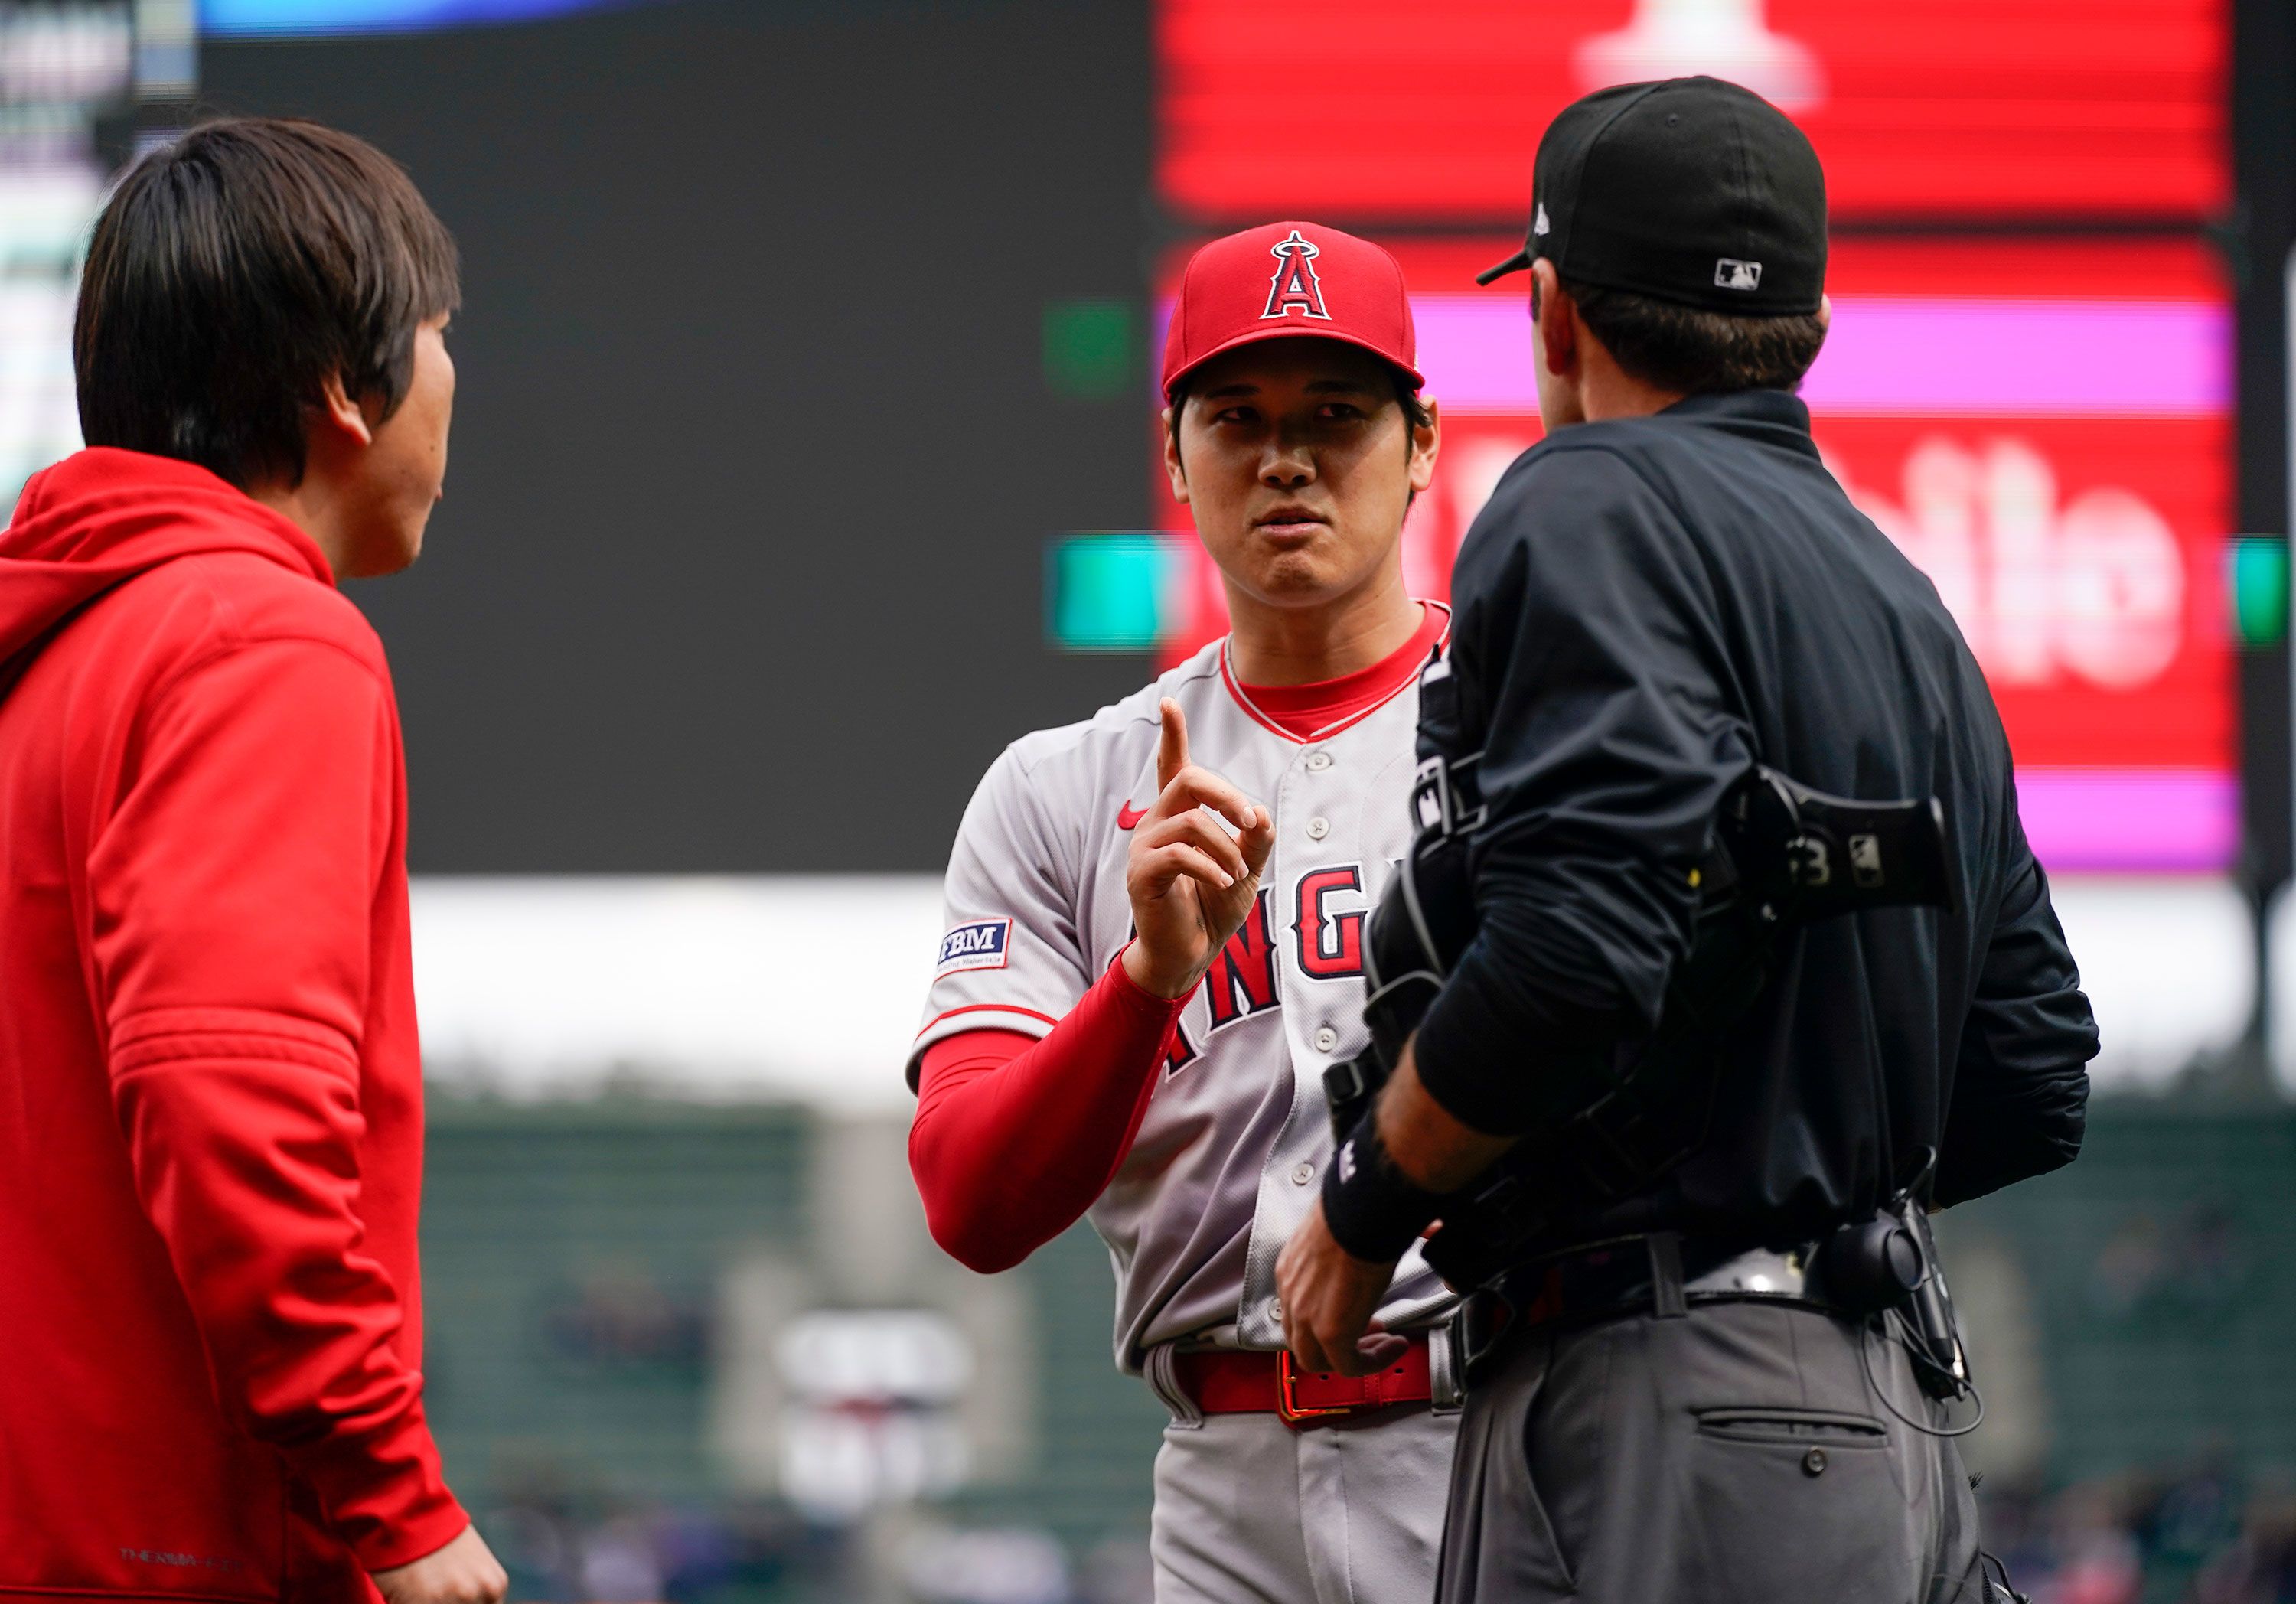 Angels, not Mariners, sign Shohei Ohtani 